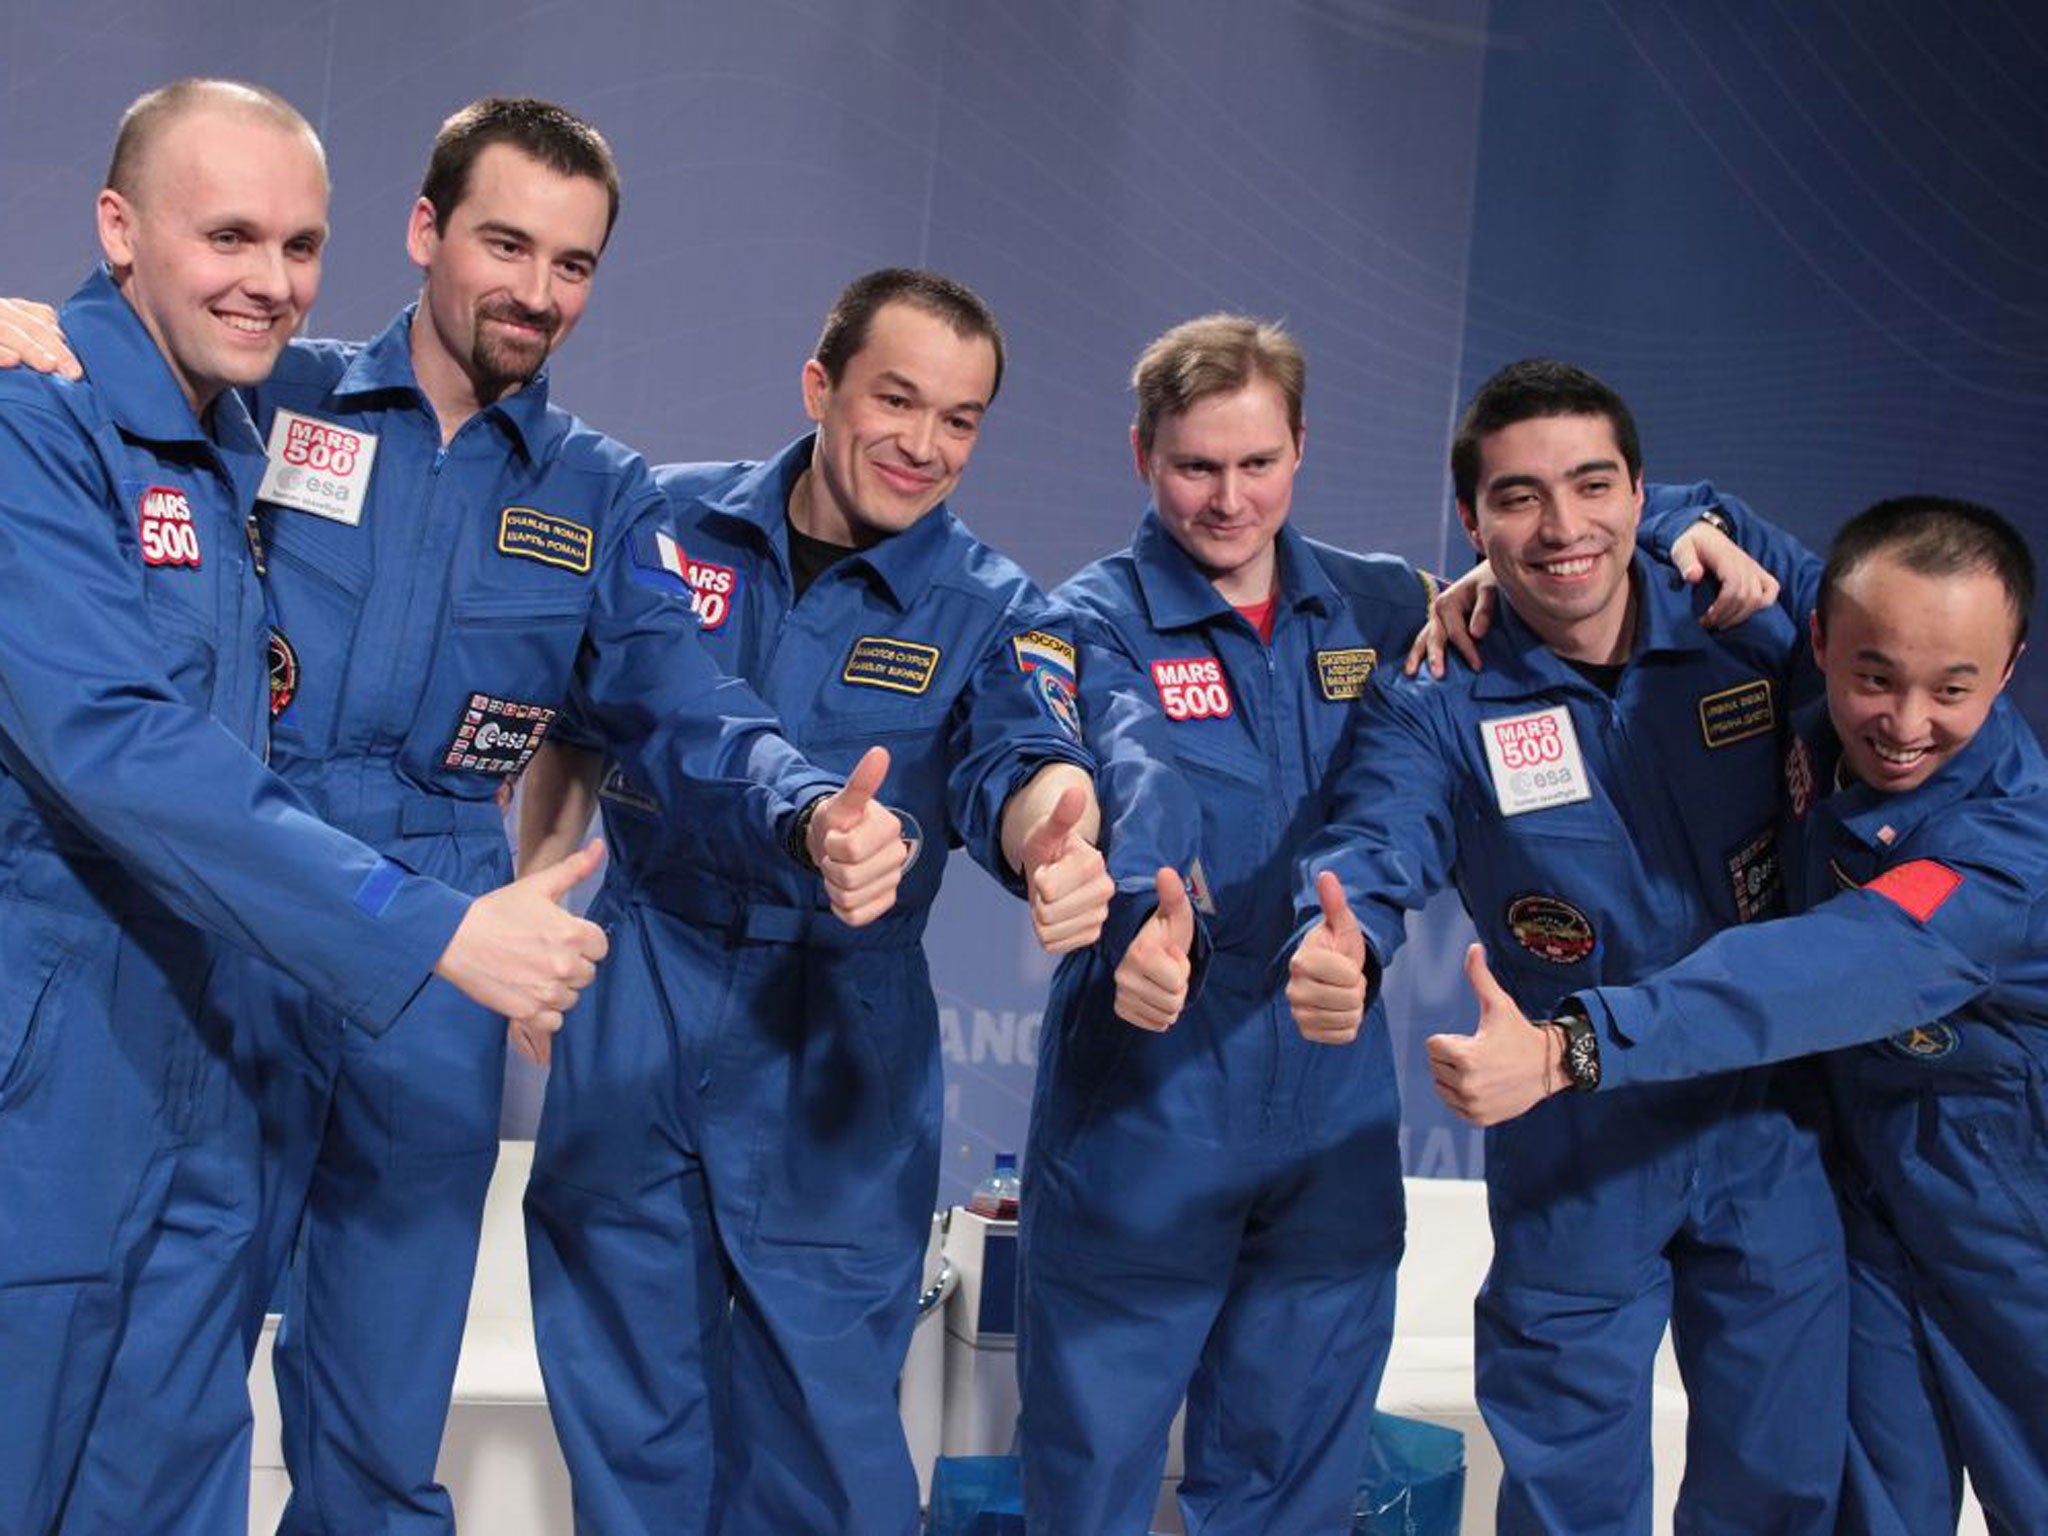 An international crew of researchers (L-R) Cosmonaut training centre specialist Alexei Sitev, European Space Agency specialists Charles Romani of France, doctor Sukhrob Kamol, military doctor Alexei Smoleyevsky, European Space Agency specialists Diego Urb